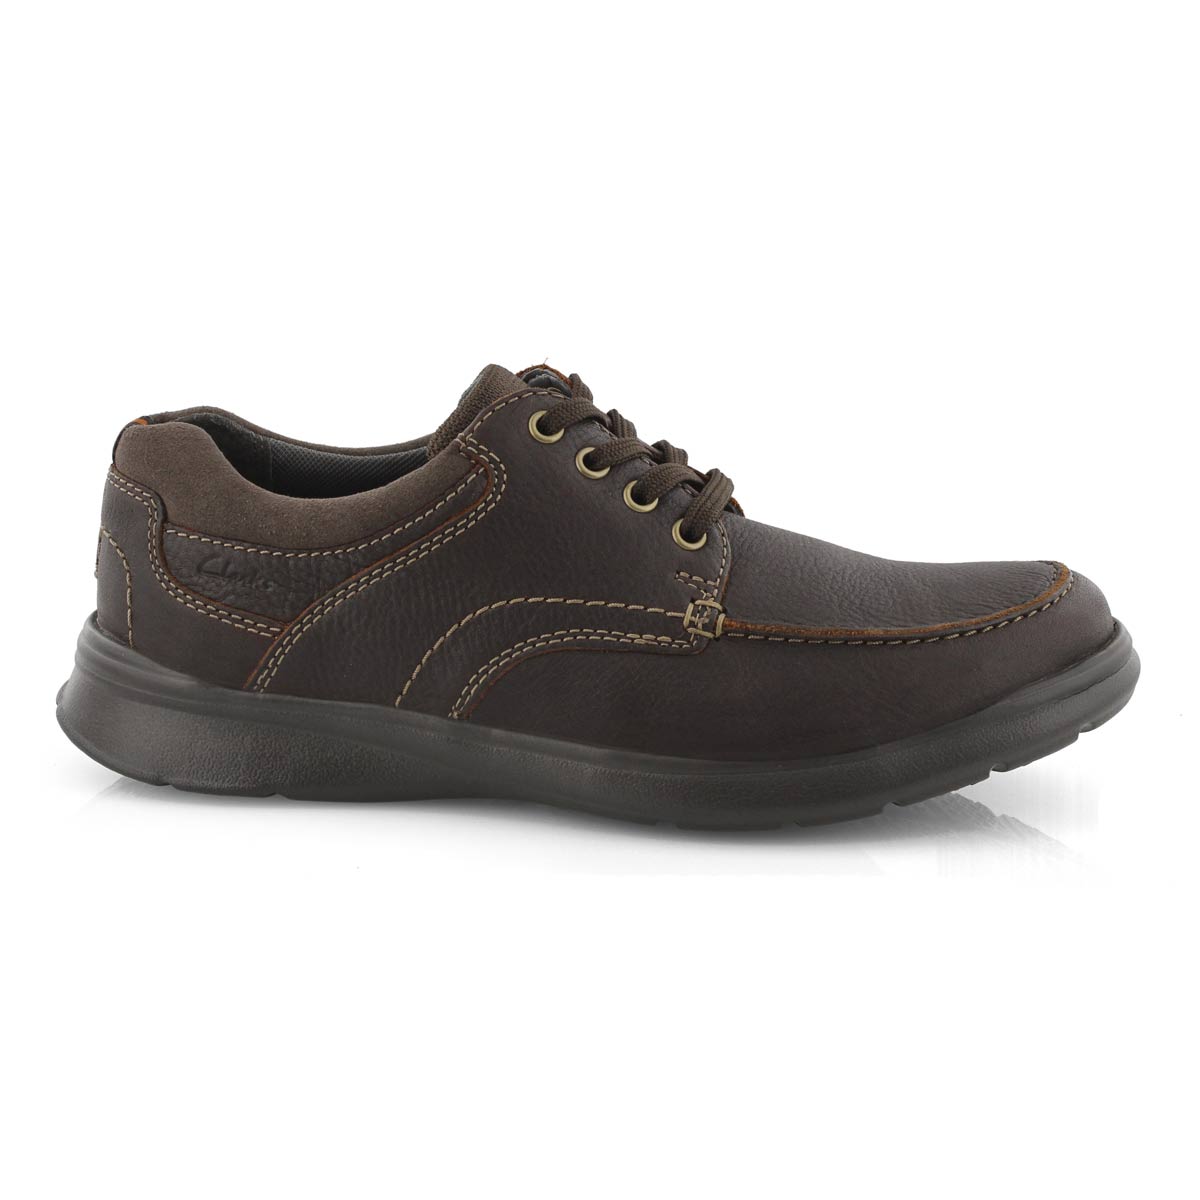 Cotrell Edge Lace Up Casual Shoe | eBay